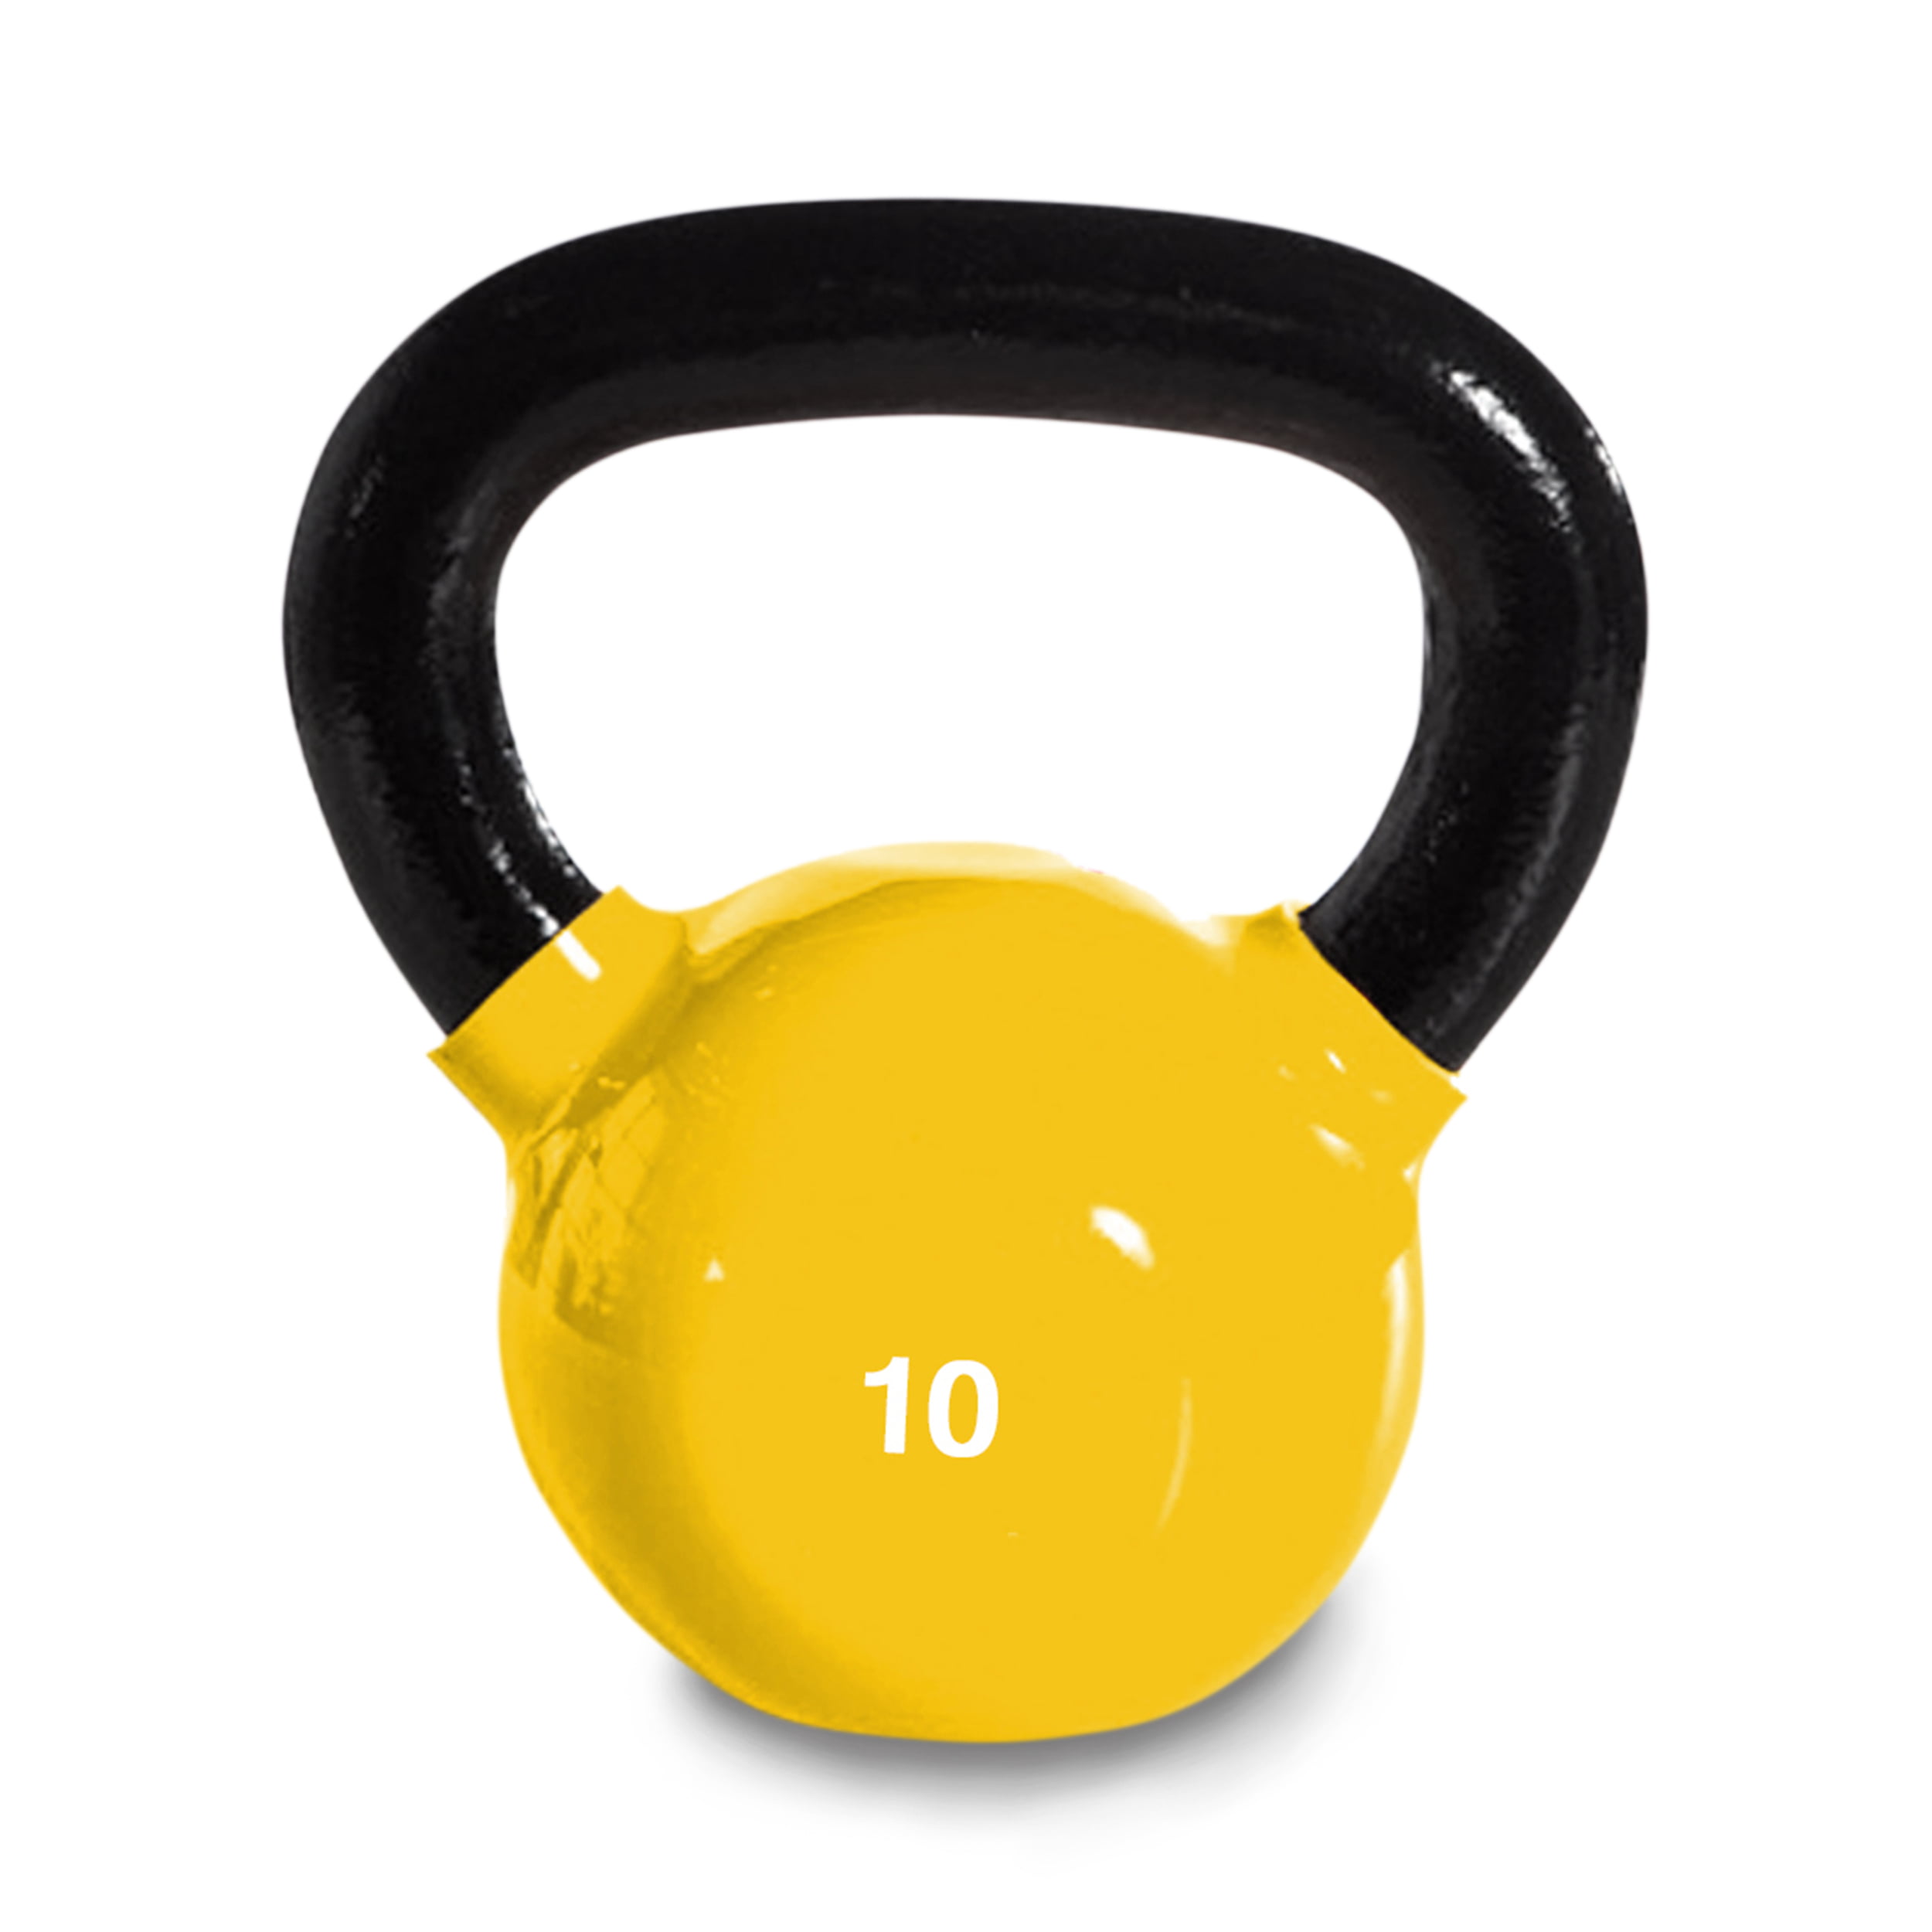 Harvil 10-Pound Yellow Kettlebell Weight with Ergonomically Rounded Handles and Pound Markings. Walmart.com